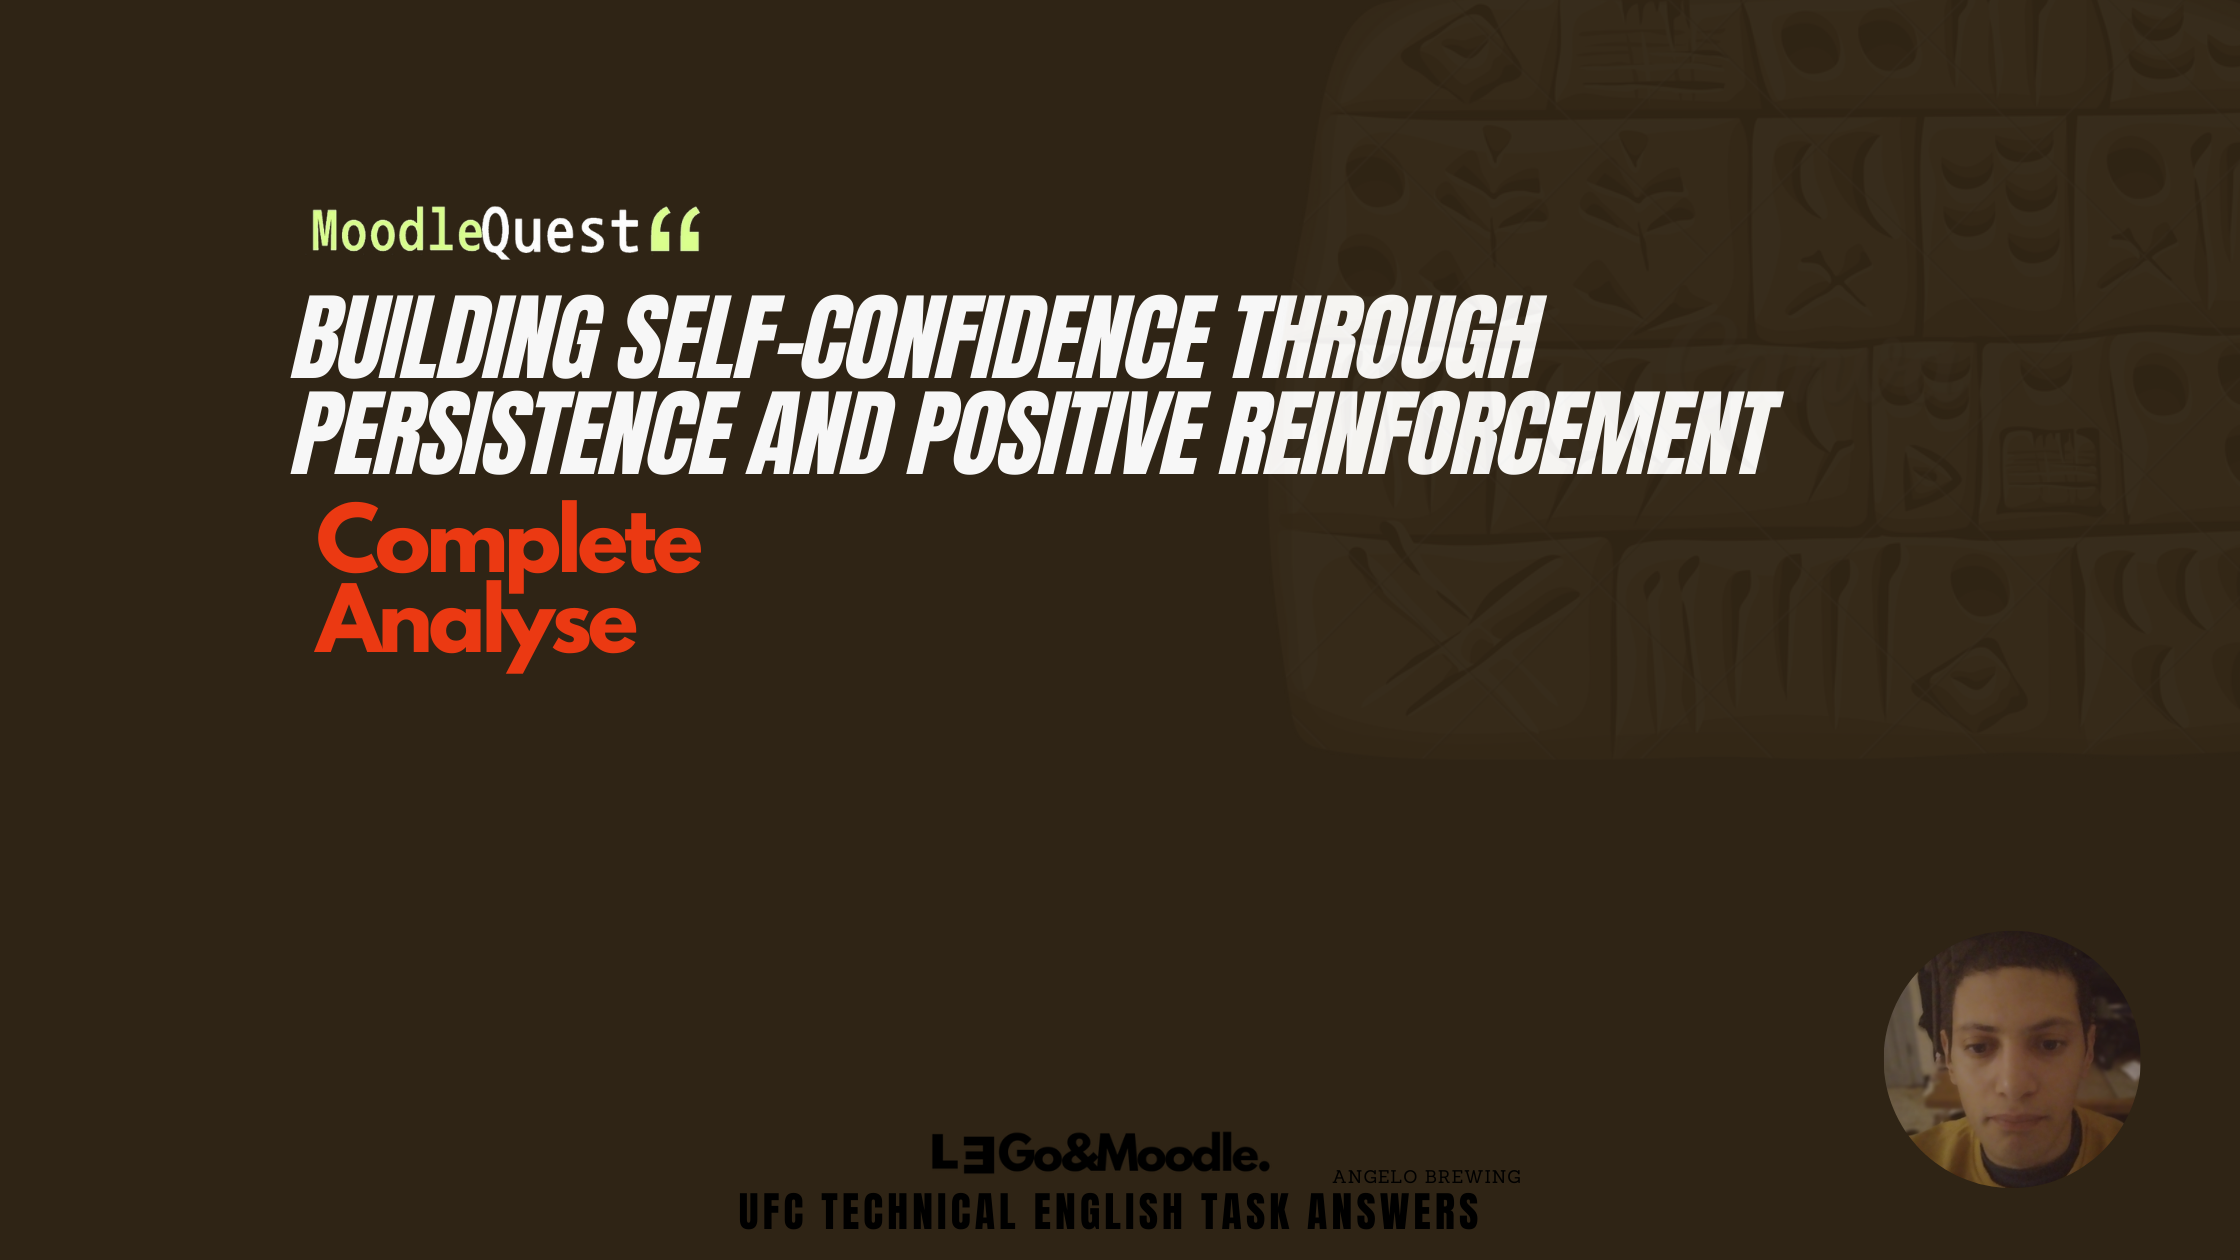 Building Self-Confidence Through Persistence and Positive Reinforcement